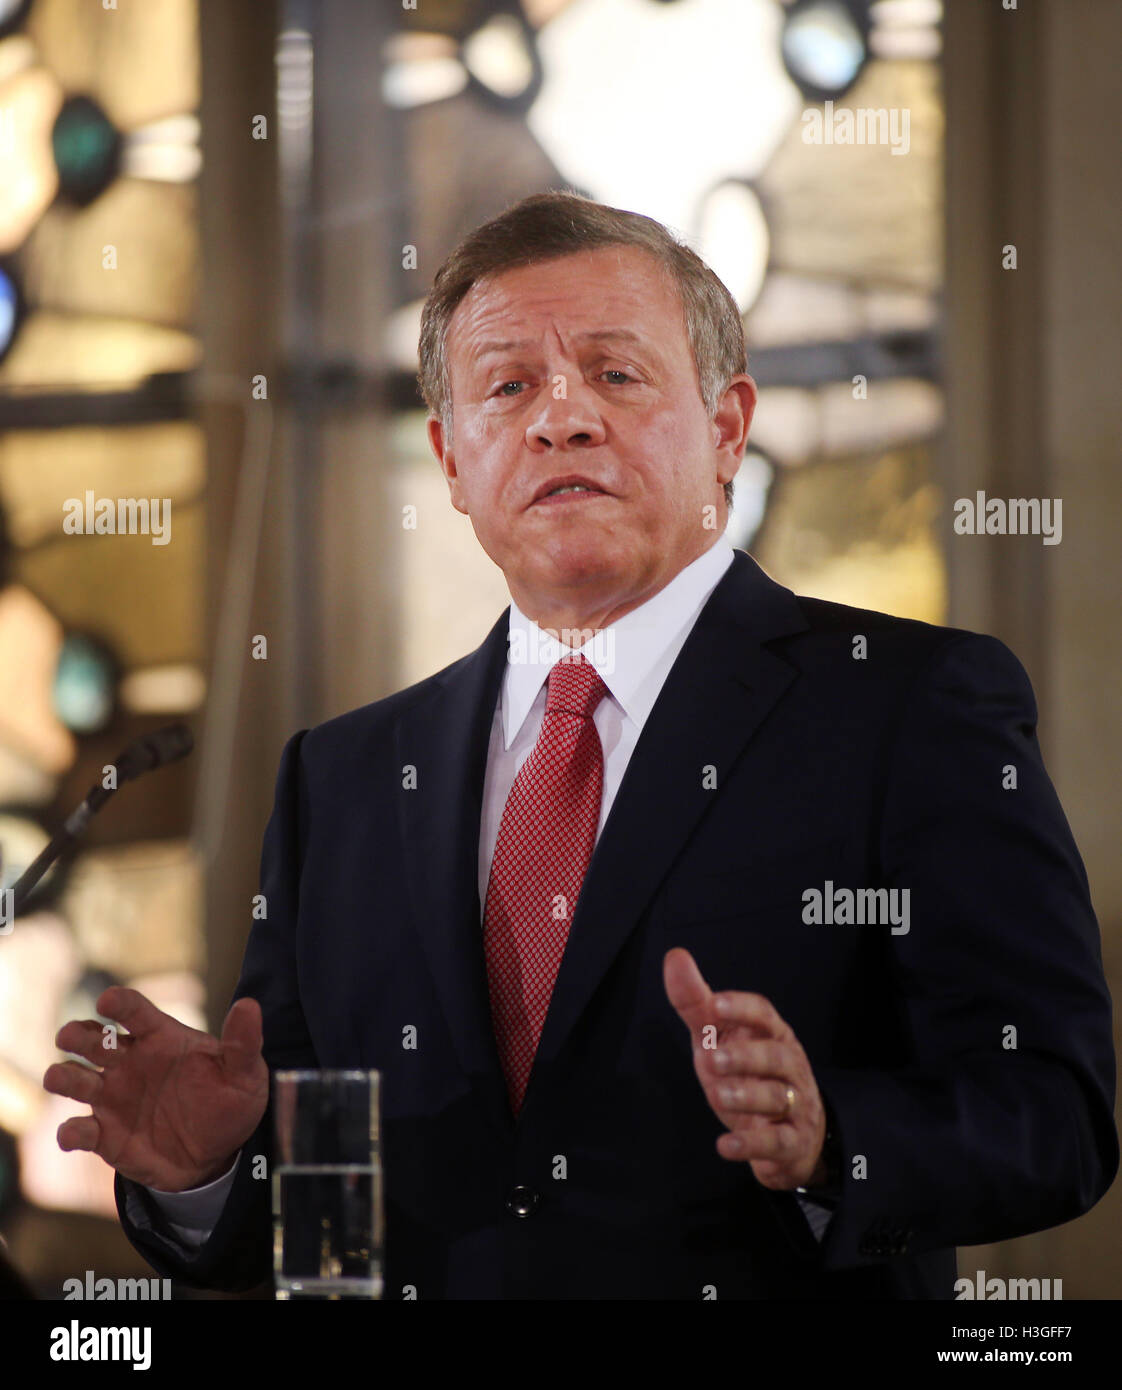 King Abdullah II of Jordan gives a speech at the award ceremony of the Westfaelischer Friedenspreises (lit. Westphalian Peace Prize) in Muenster, Germany, 8 October 2106. He received the award for his mediating role in the Middle East. PHOTO: INA FASSBENDER/DPA Stock Photo